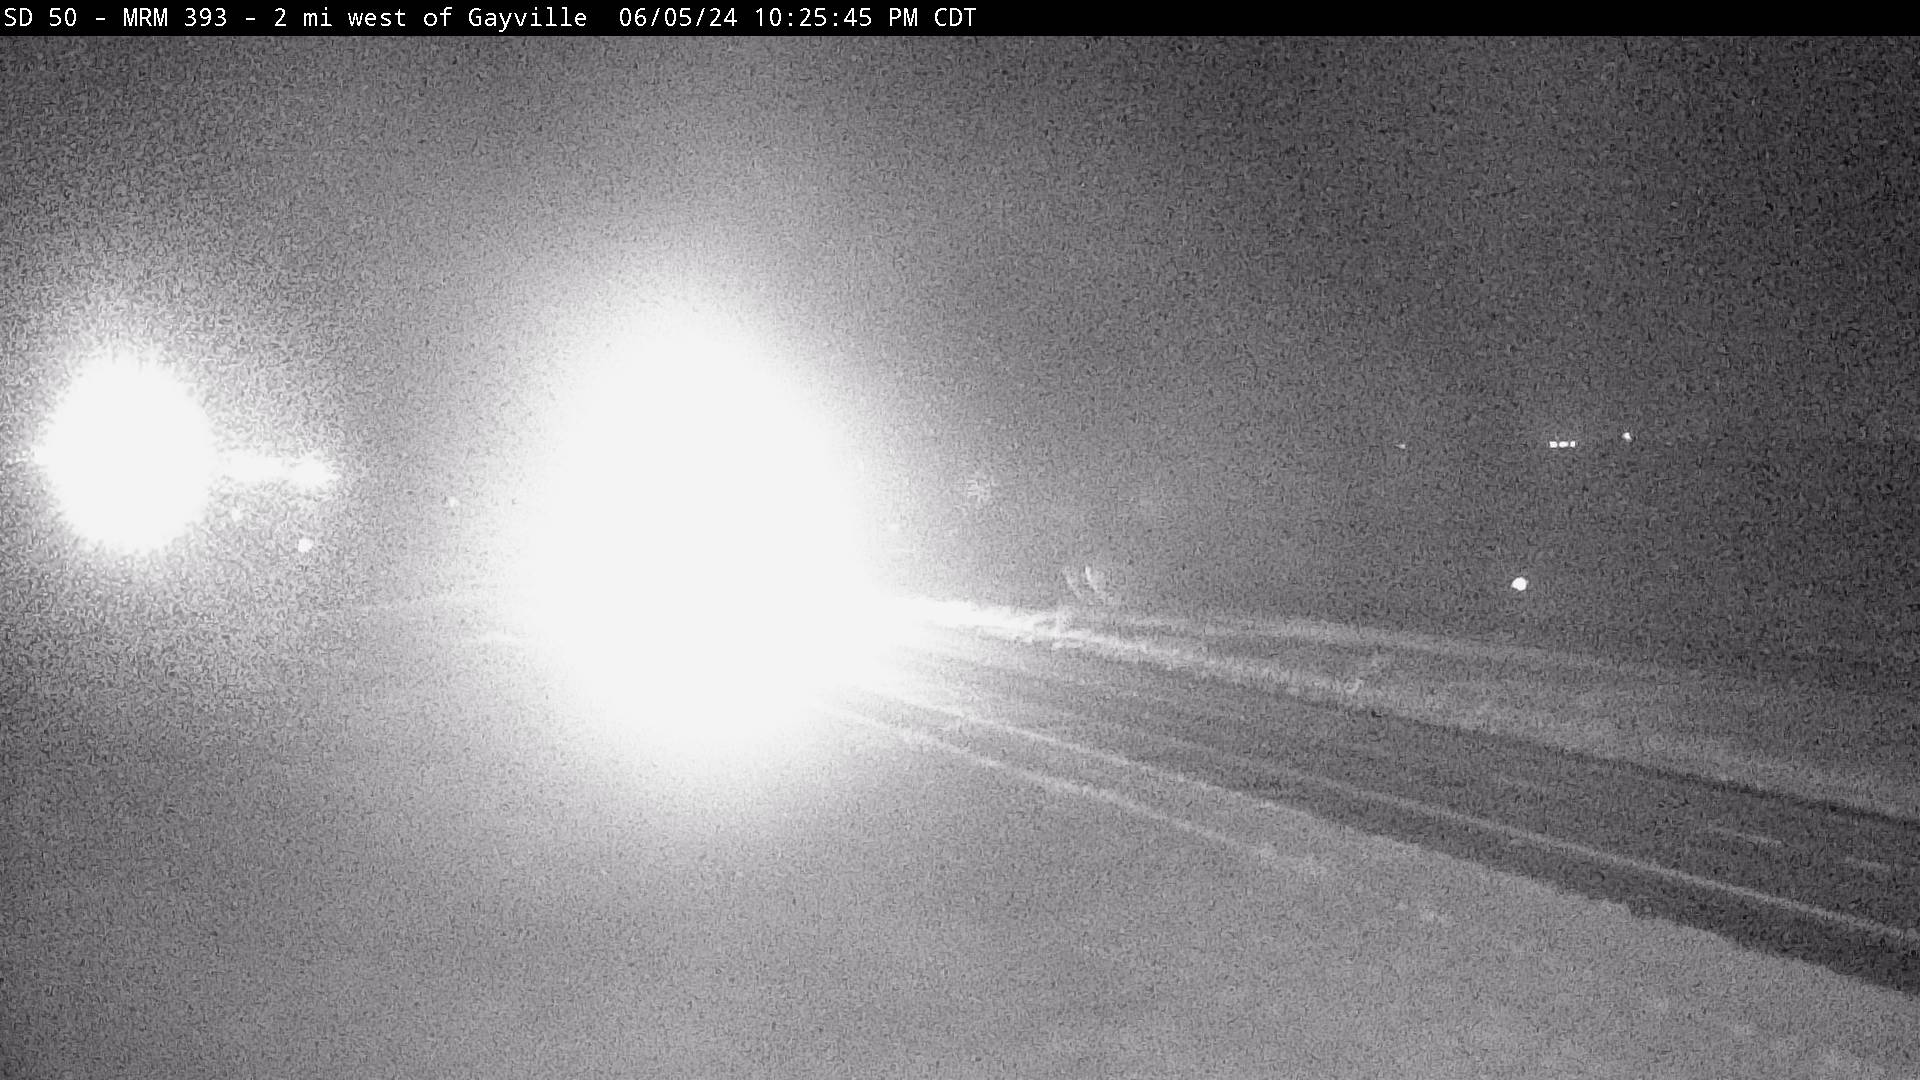 Traffic Cam 2 miles west of town along SD-50 @ MP 393 - East Player